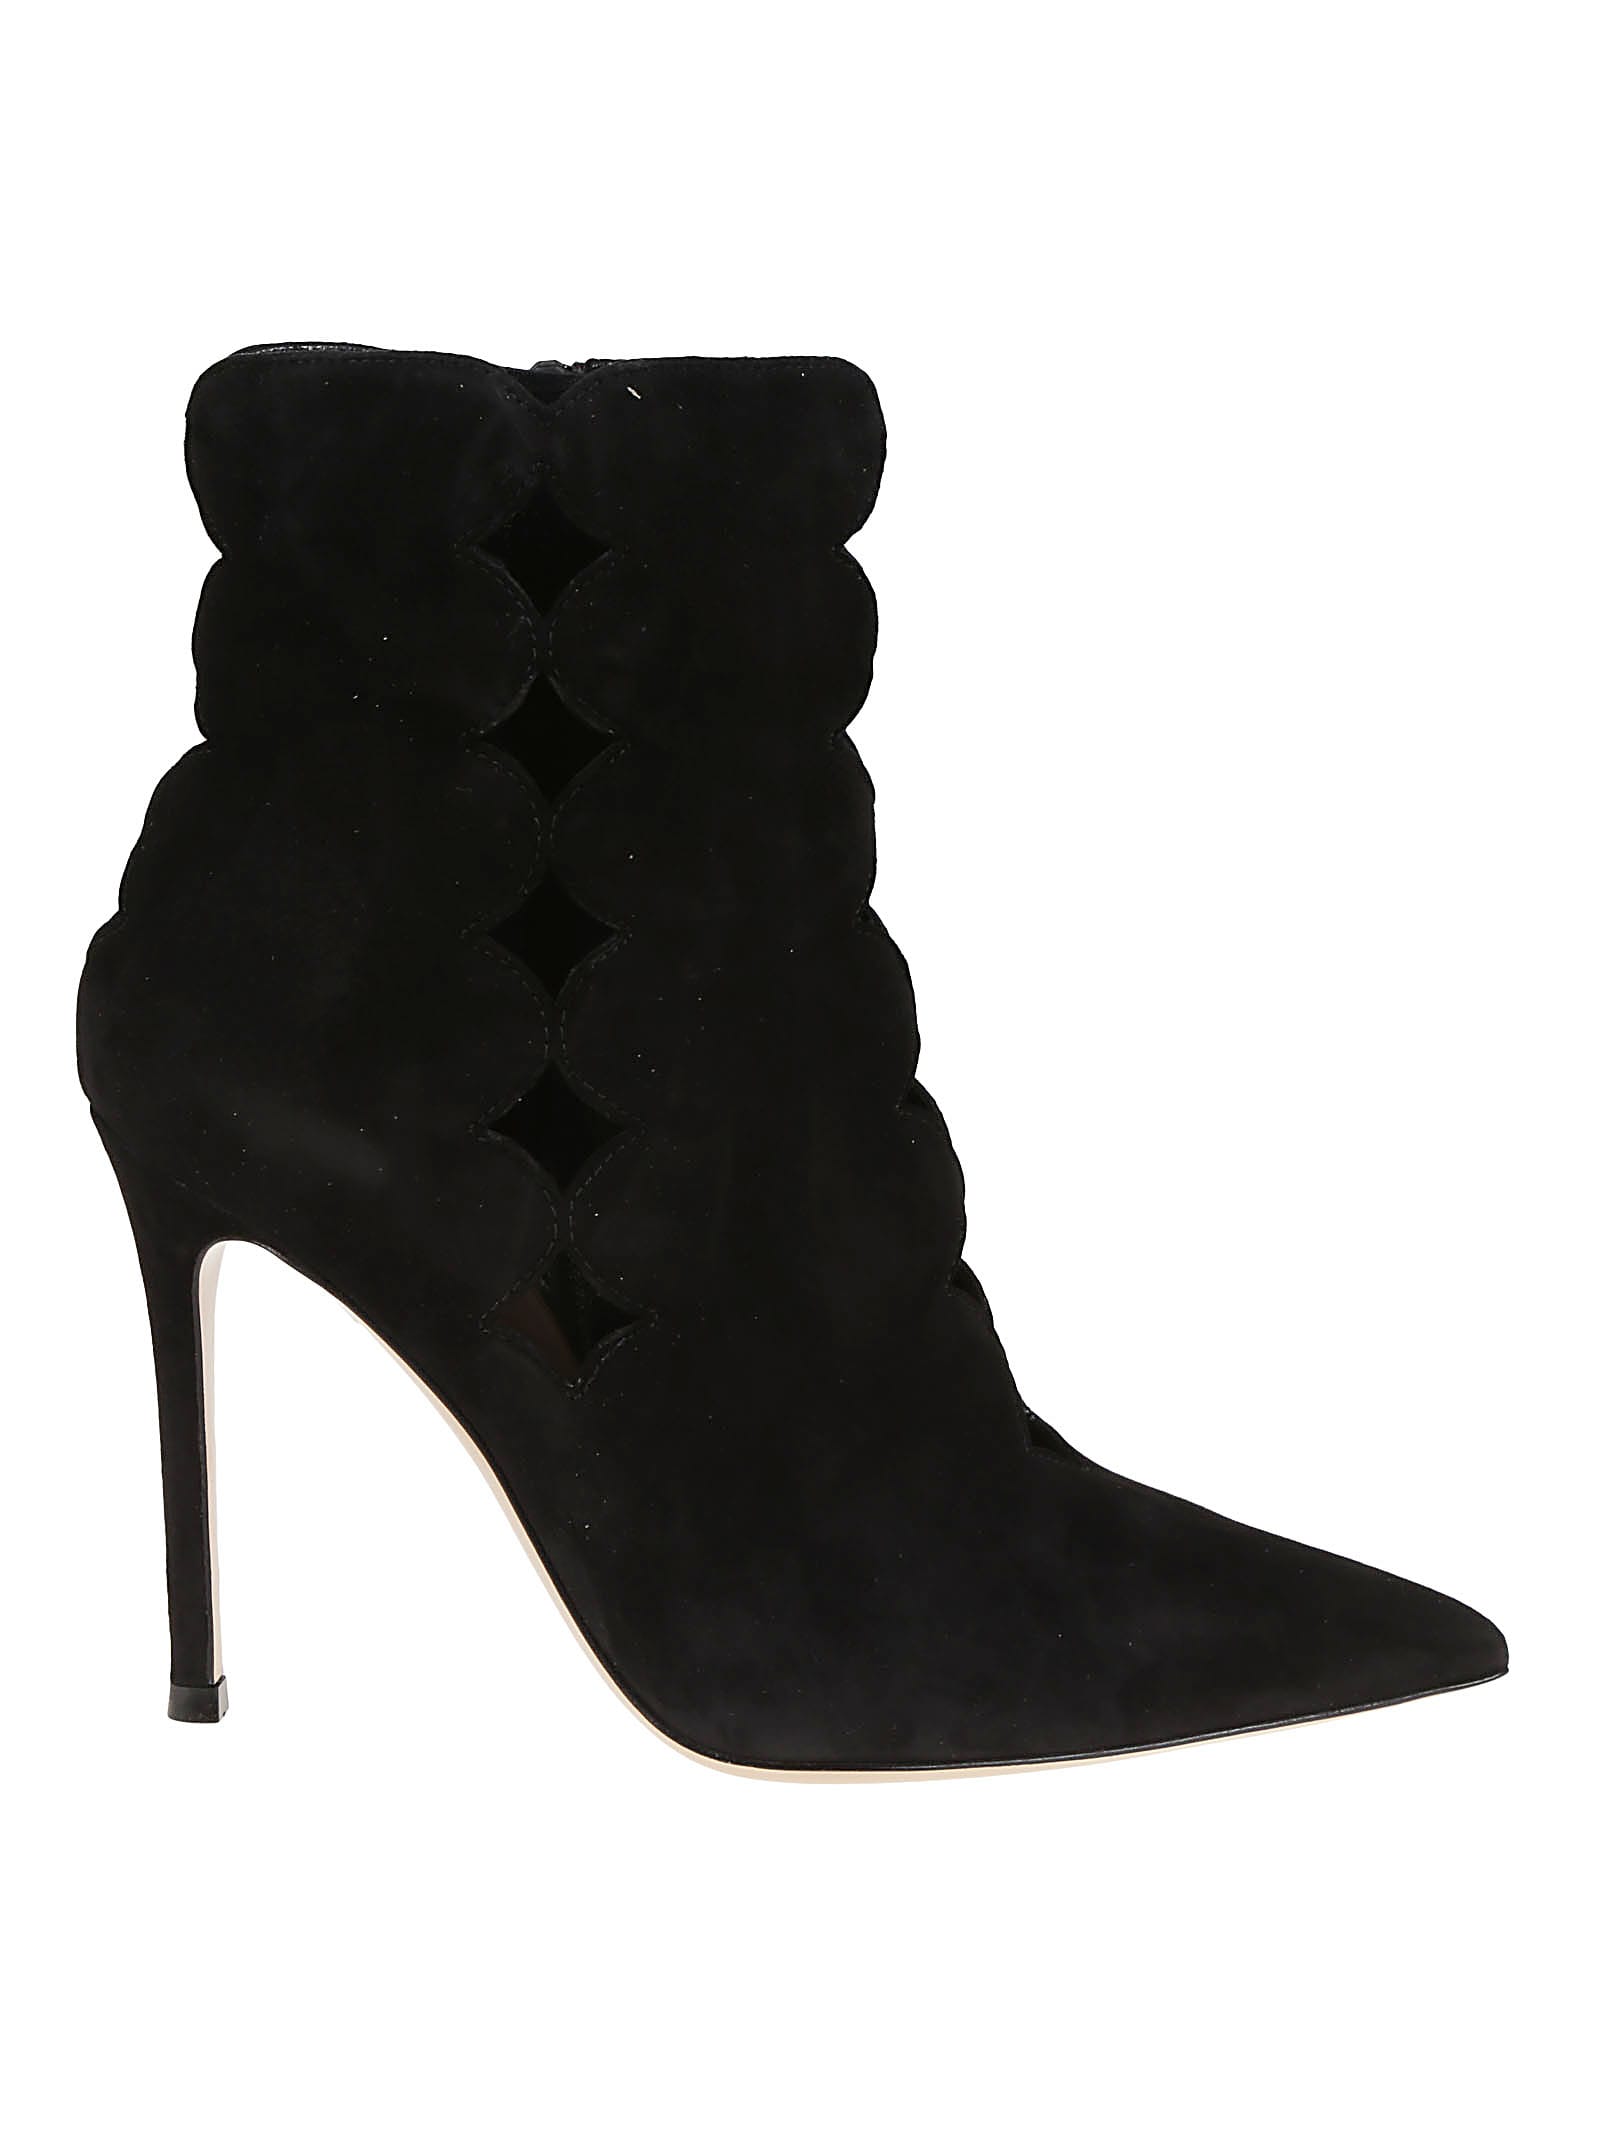 gianvito rossi ariana ankle boots